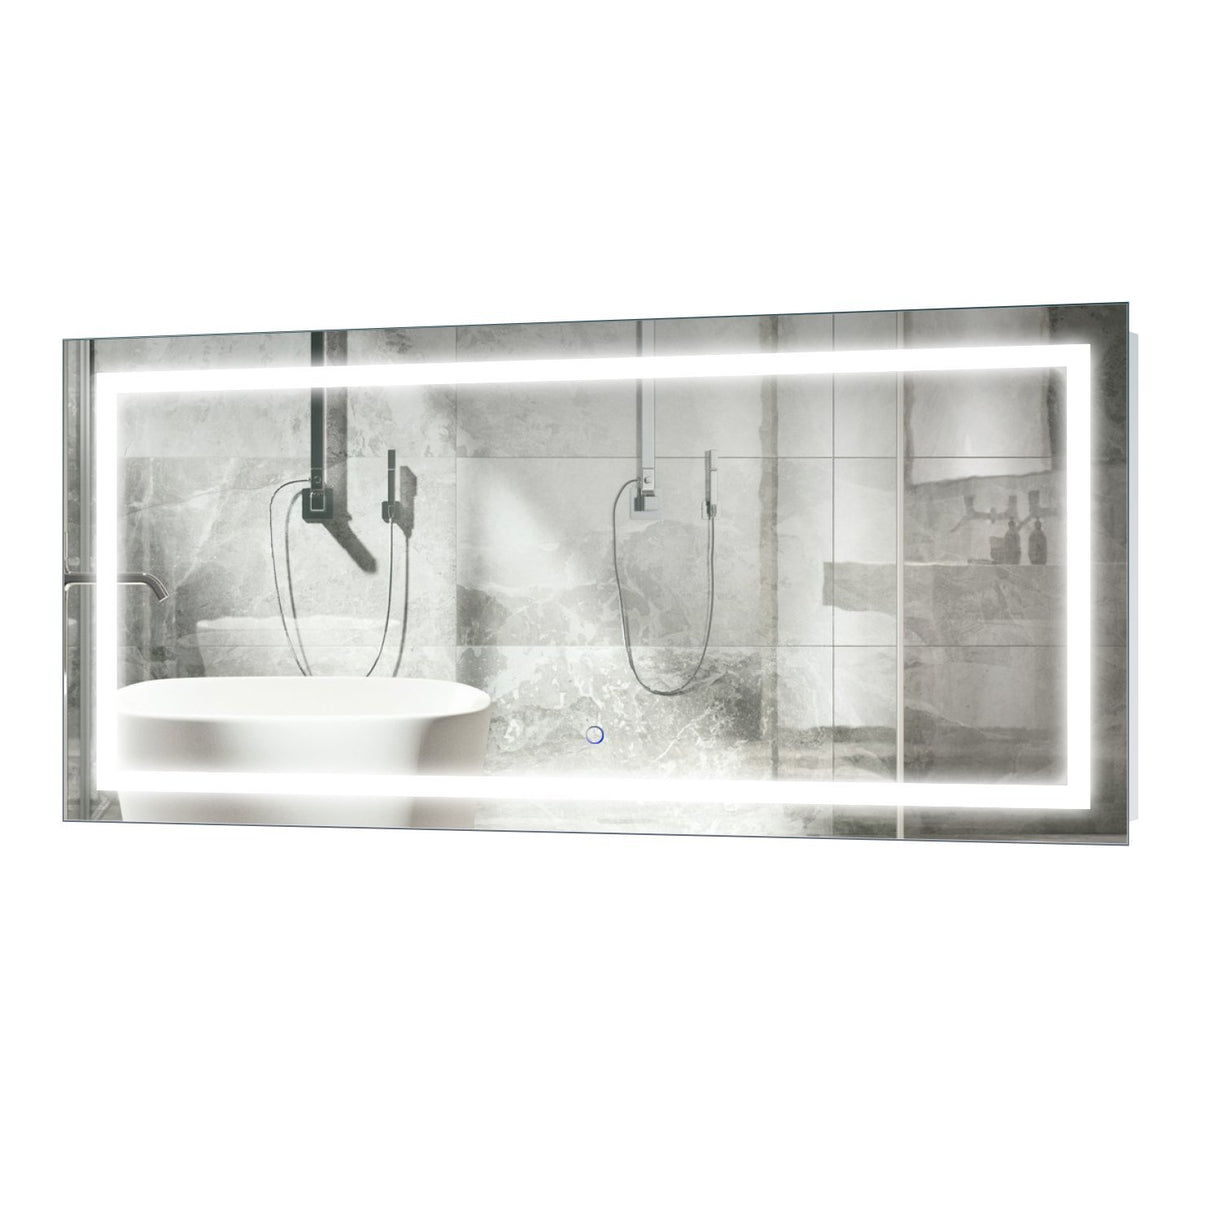 Krugg Icon4824 Krugg Icon4824 Large 48"x24" LED Bath Mirror Lighted Vanity Mirror Includes Dimmer & Defogger Wall Mount Vertical or Horizontal Installation